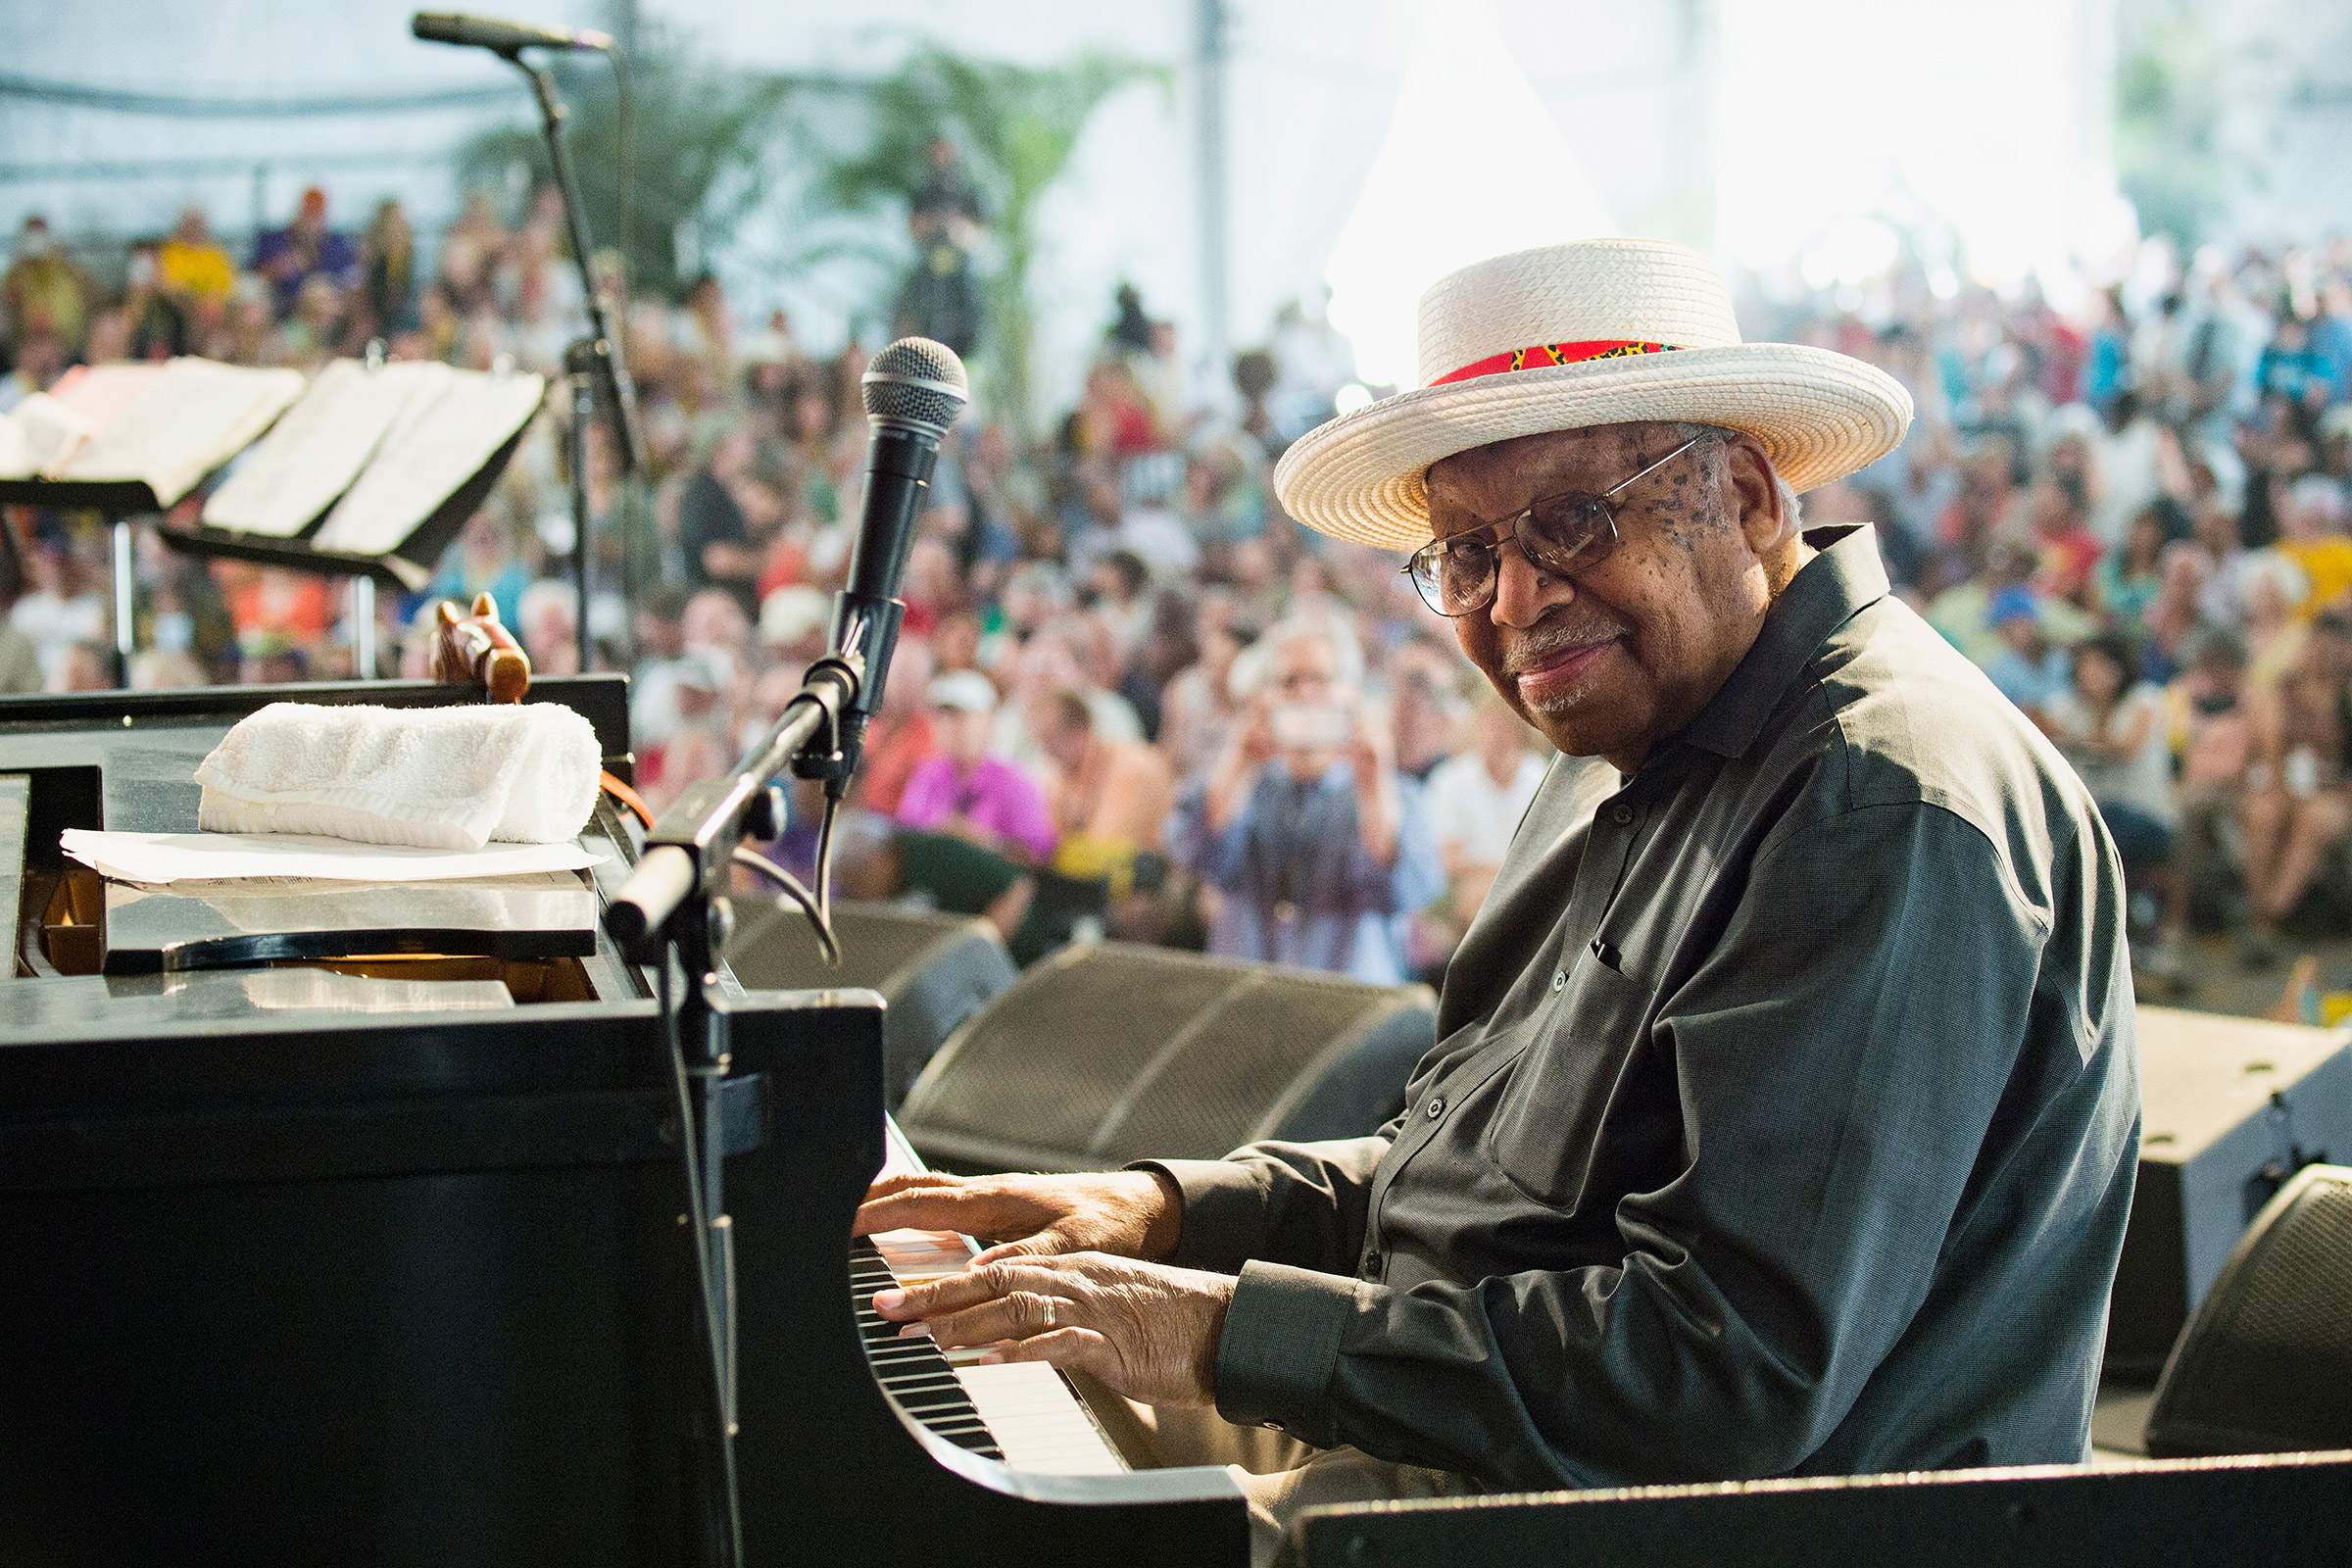 Ellis Marsalis performs during the 2017 New Orleans Jazz and Heritage Festival at Fair Grounds Race Course in New Orleans on May 7, 2017. (Erika Goldring—Getty Images)